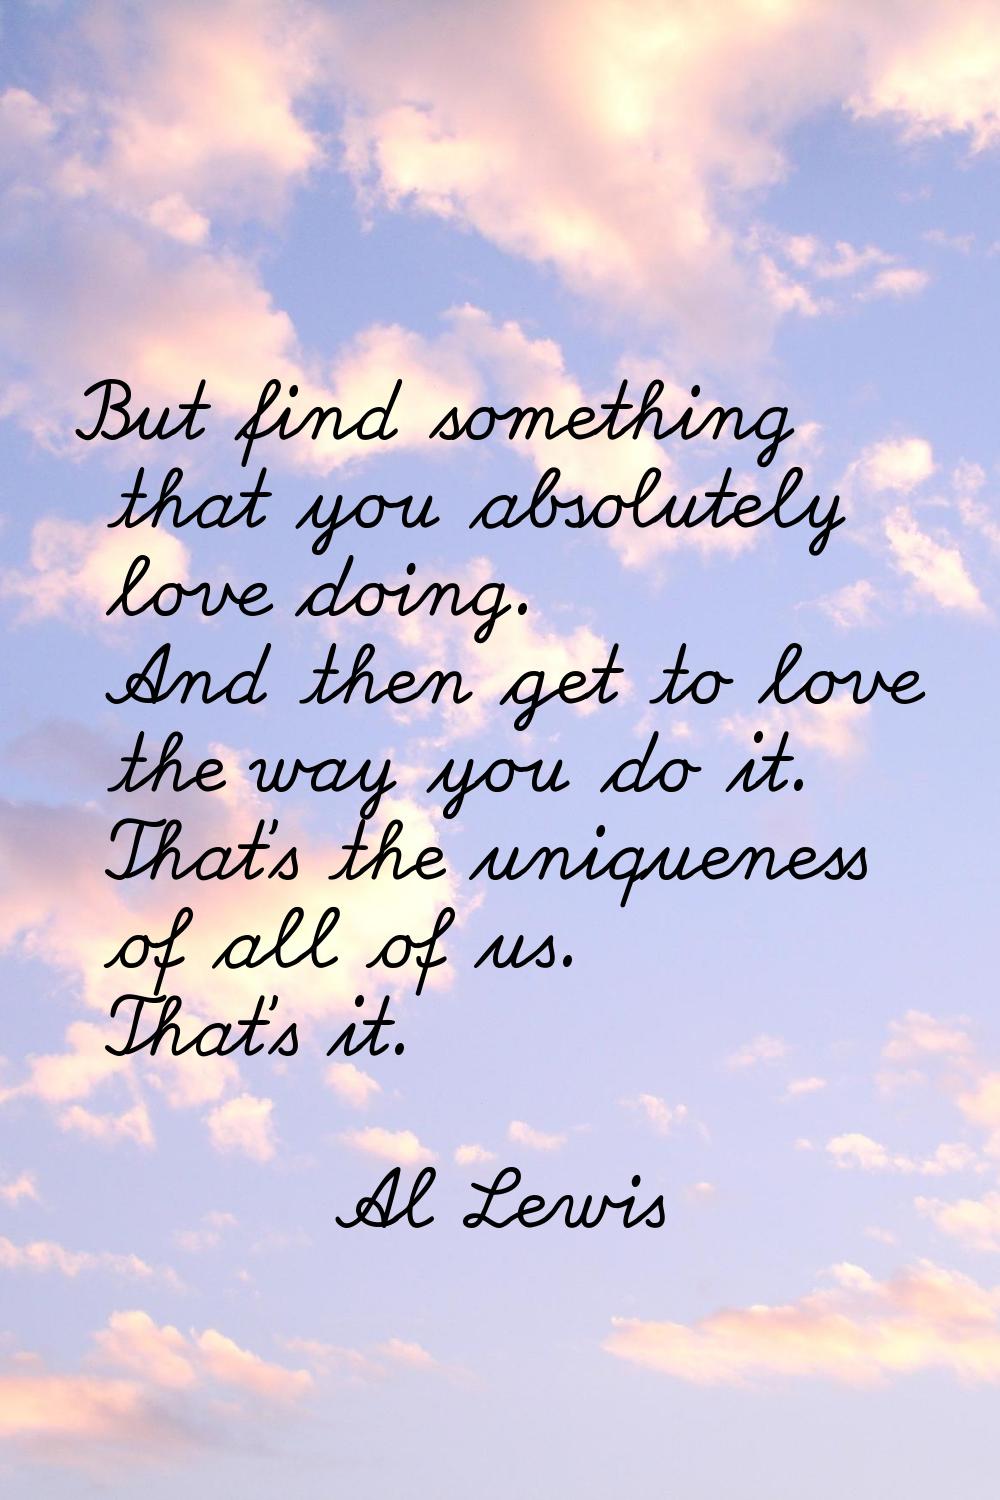 But find something that you absolutely love doing. And then get to love the way you do it. That's t